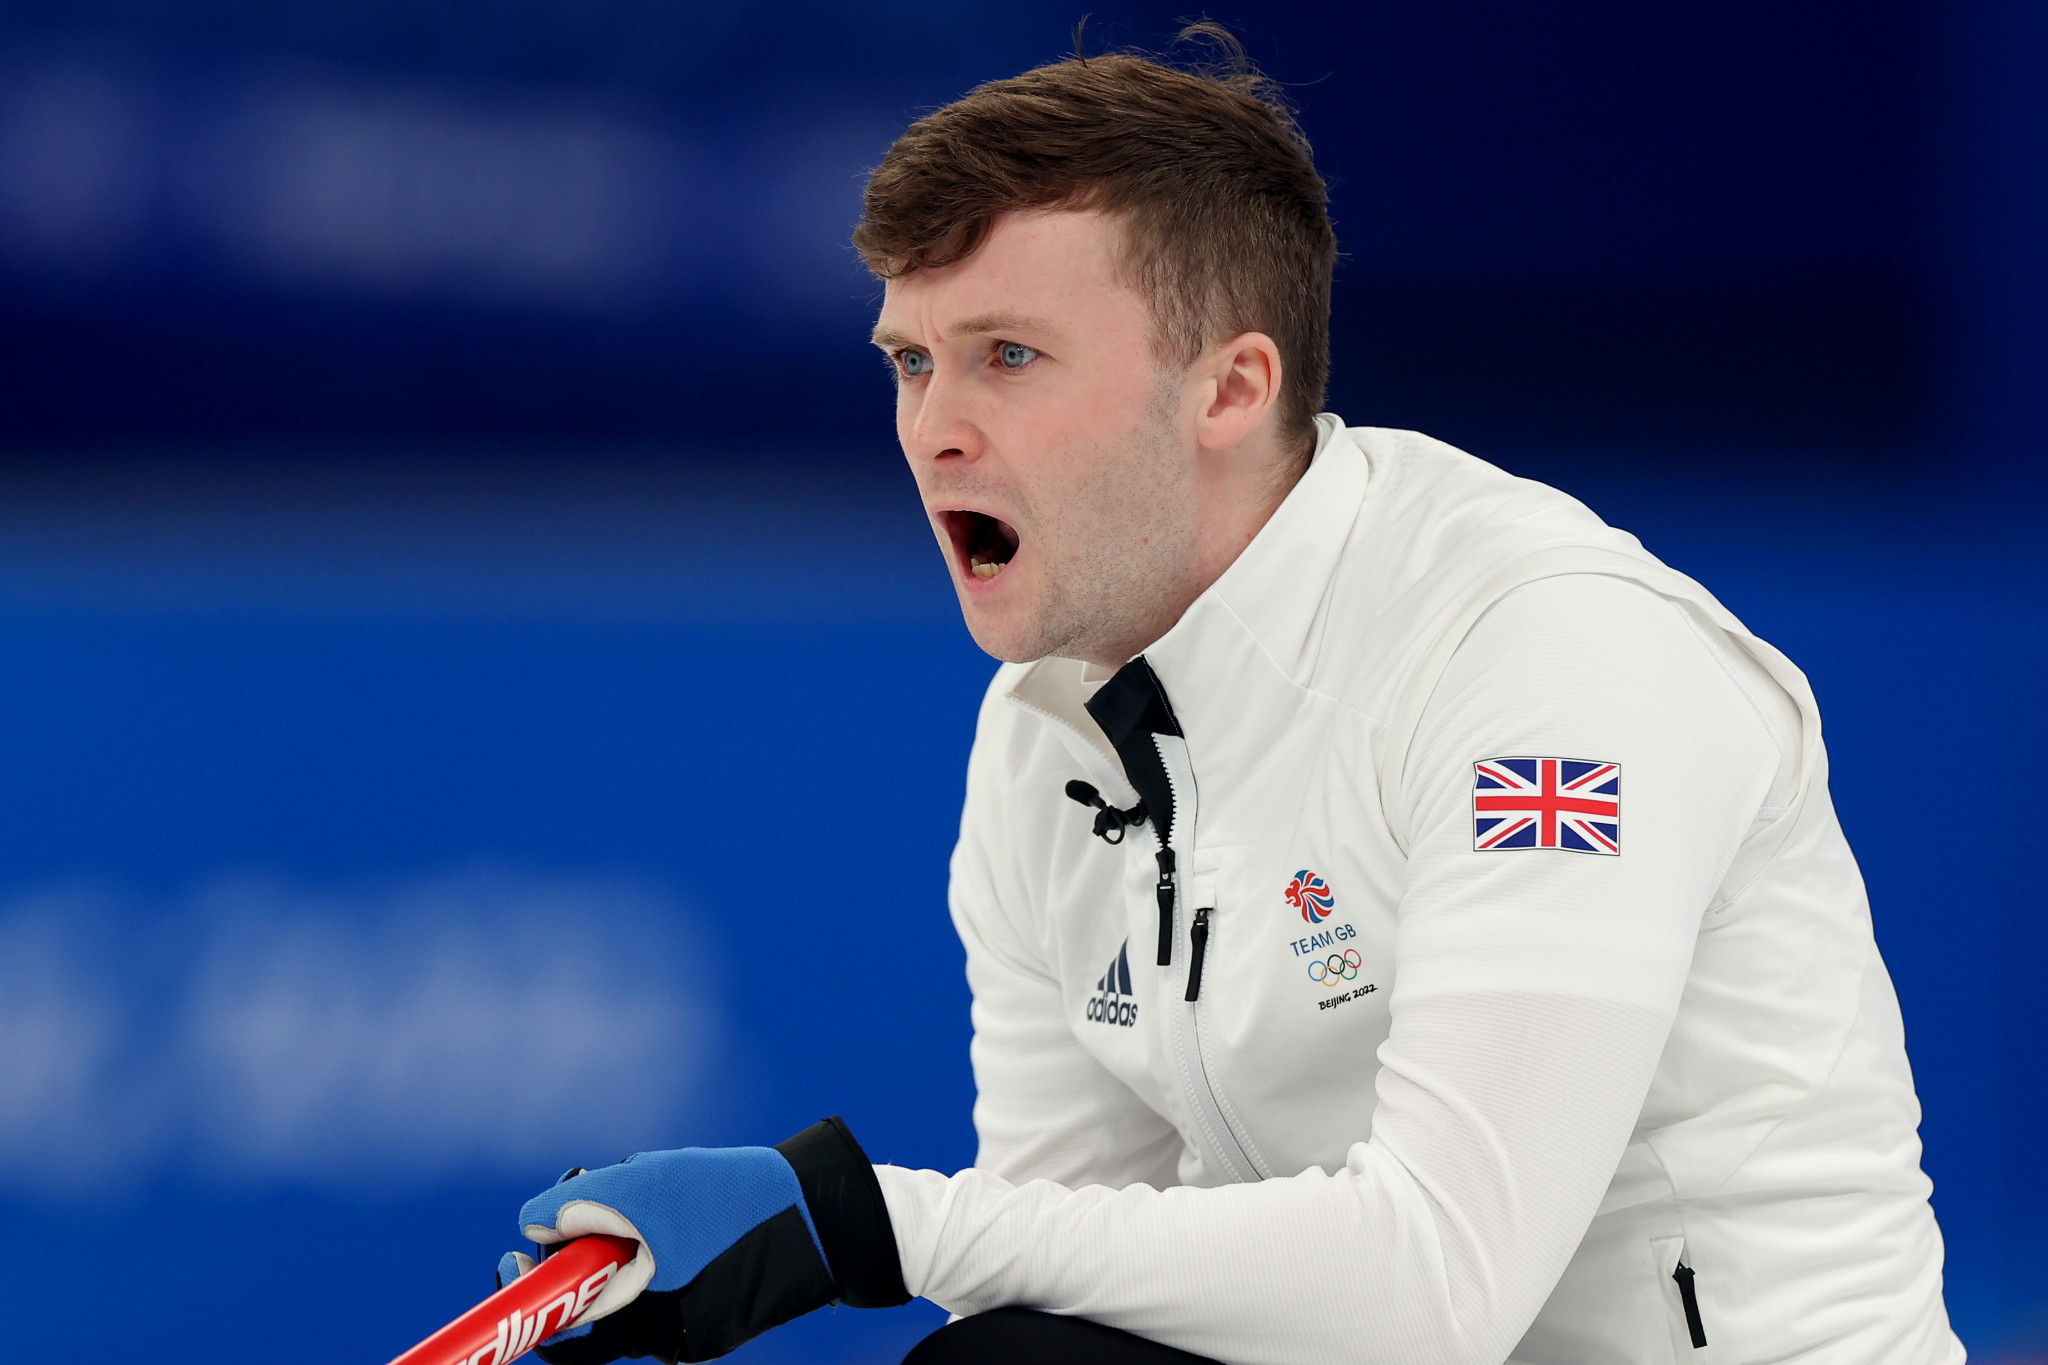 Olympic silver medallist Bruce Mouat suffered a surprise defeat at the Champions Cup as his Scottish team went down 6-5 to South Korea's Team Kim Soo-hyuk ©Getty Images